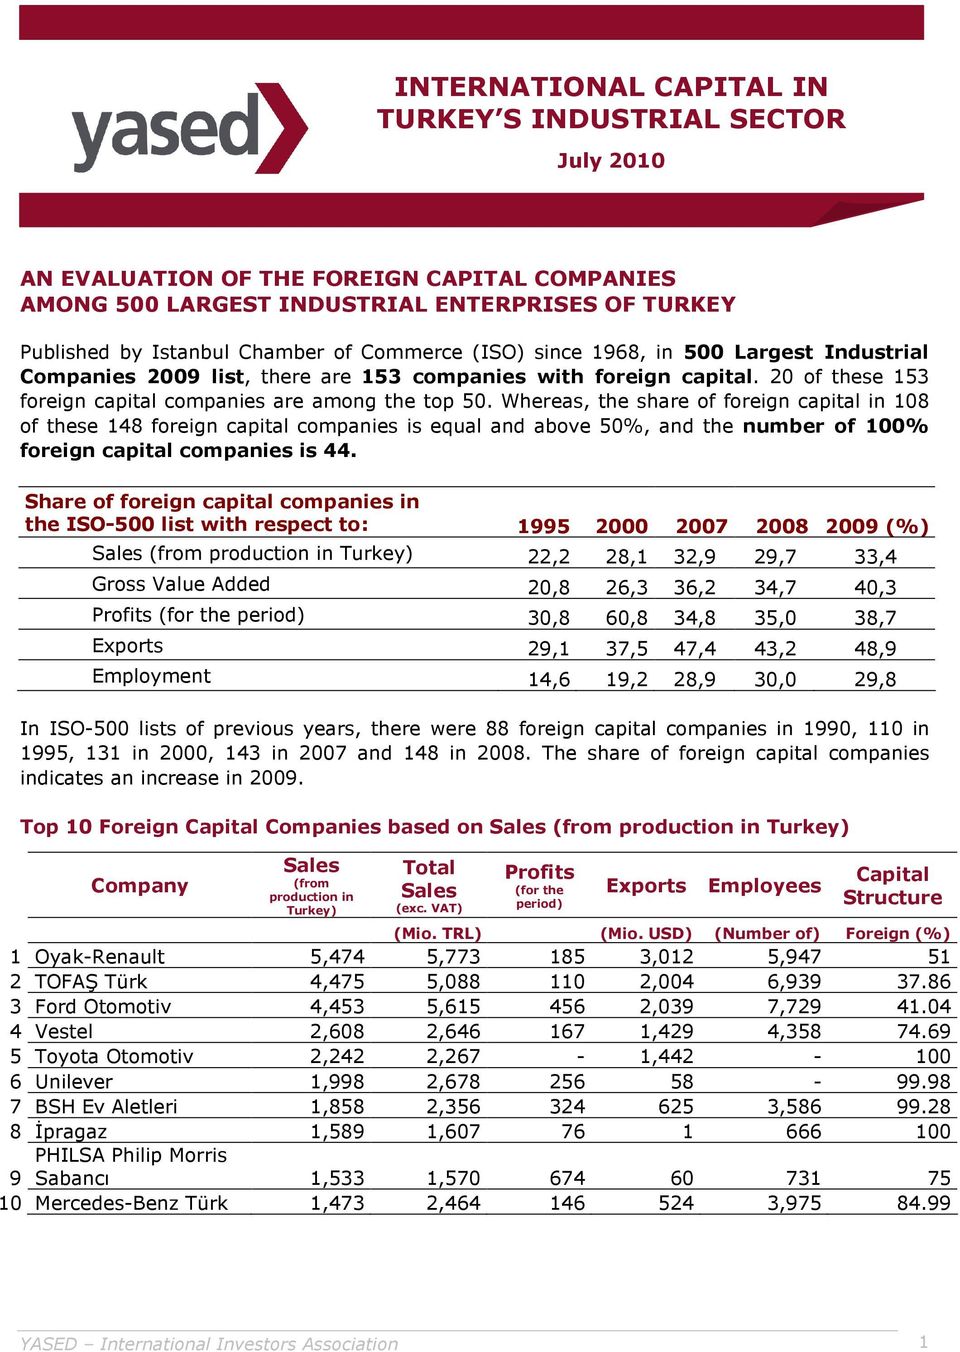 Whereas, the share of foreign capital in 108 of these 148 foreign capital companies is equal and above 50%, and the number of 100% foreign capital companies is 44.